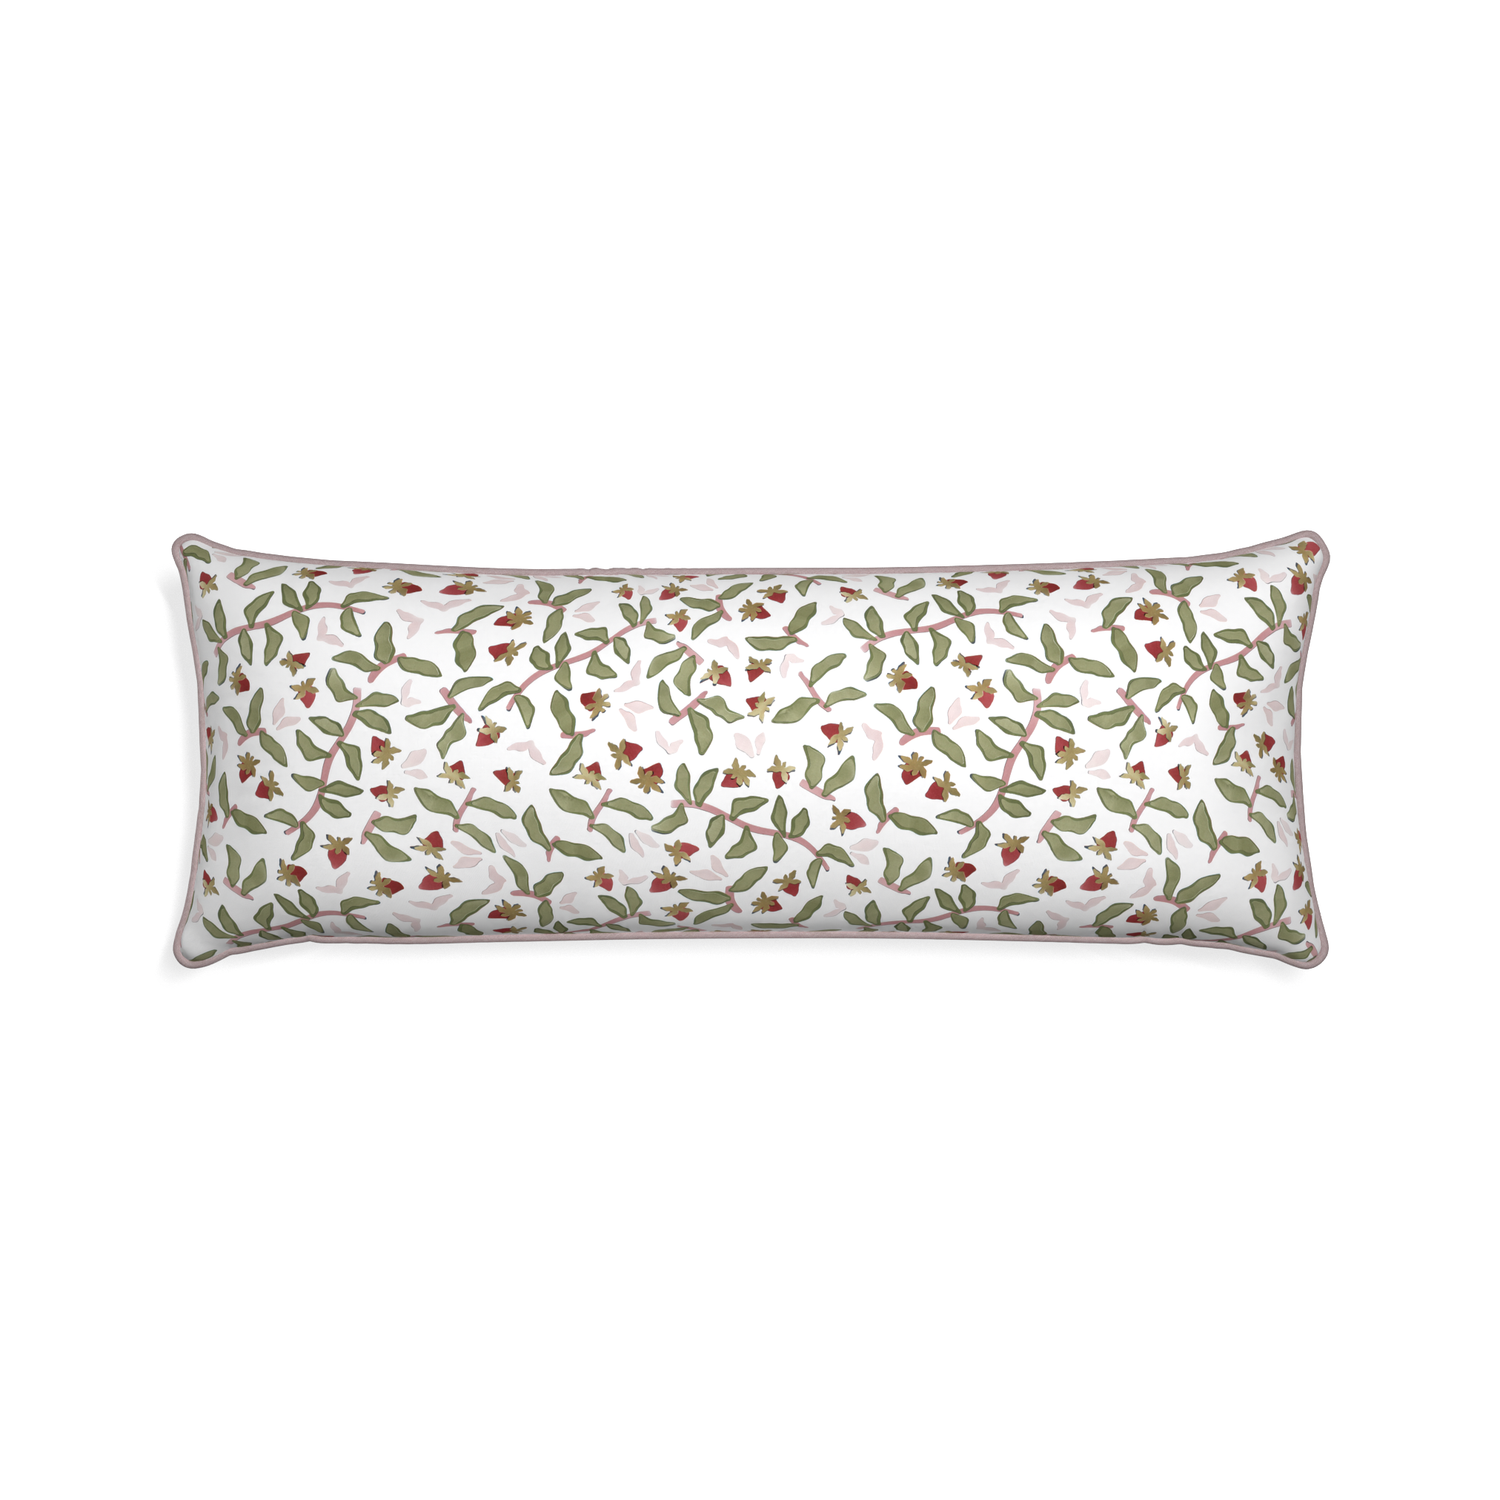 Xl-lumbar nellie custom strawberry & botanicalpillow with orchid piping on white background